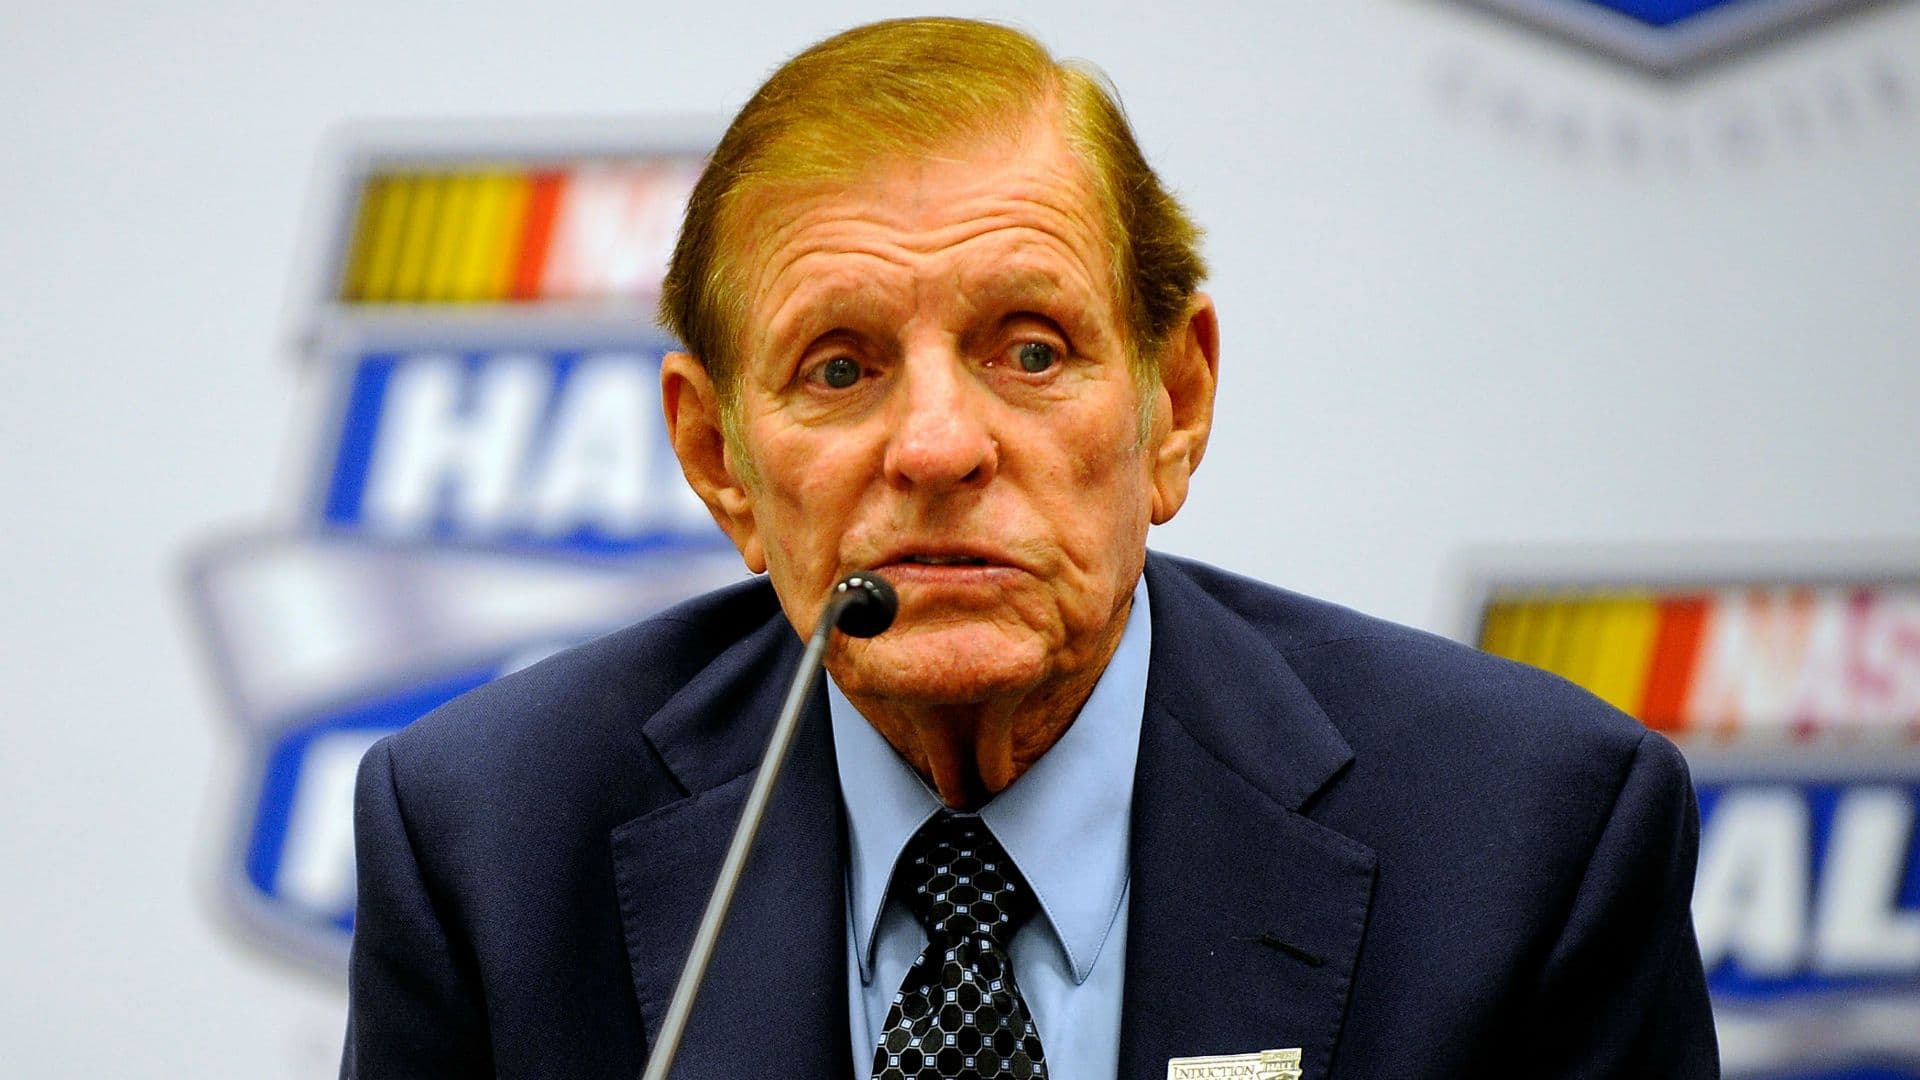 NASCAR and Trans-Am Racing Legend Bud Moore Dies at 92